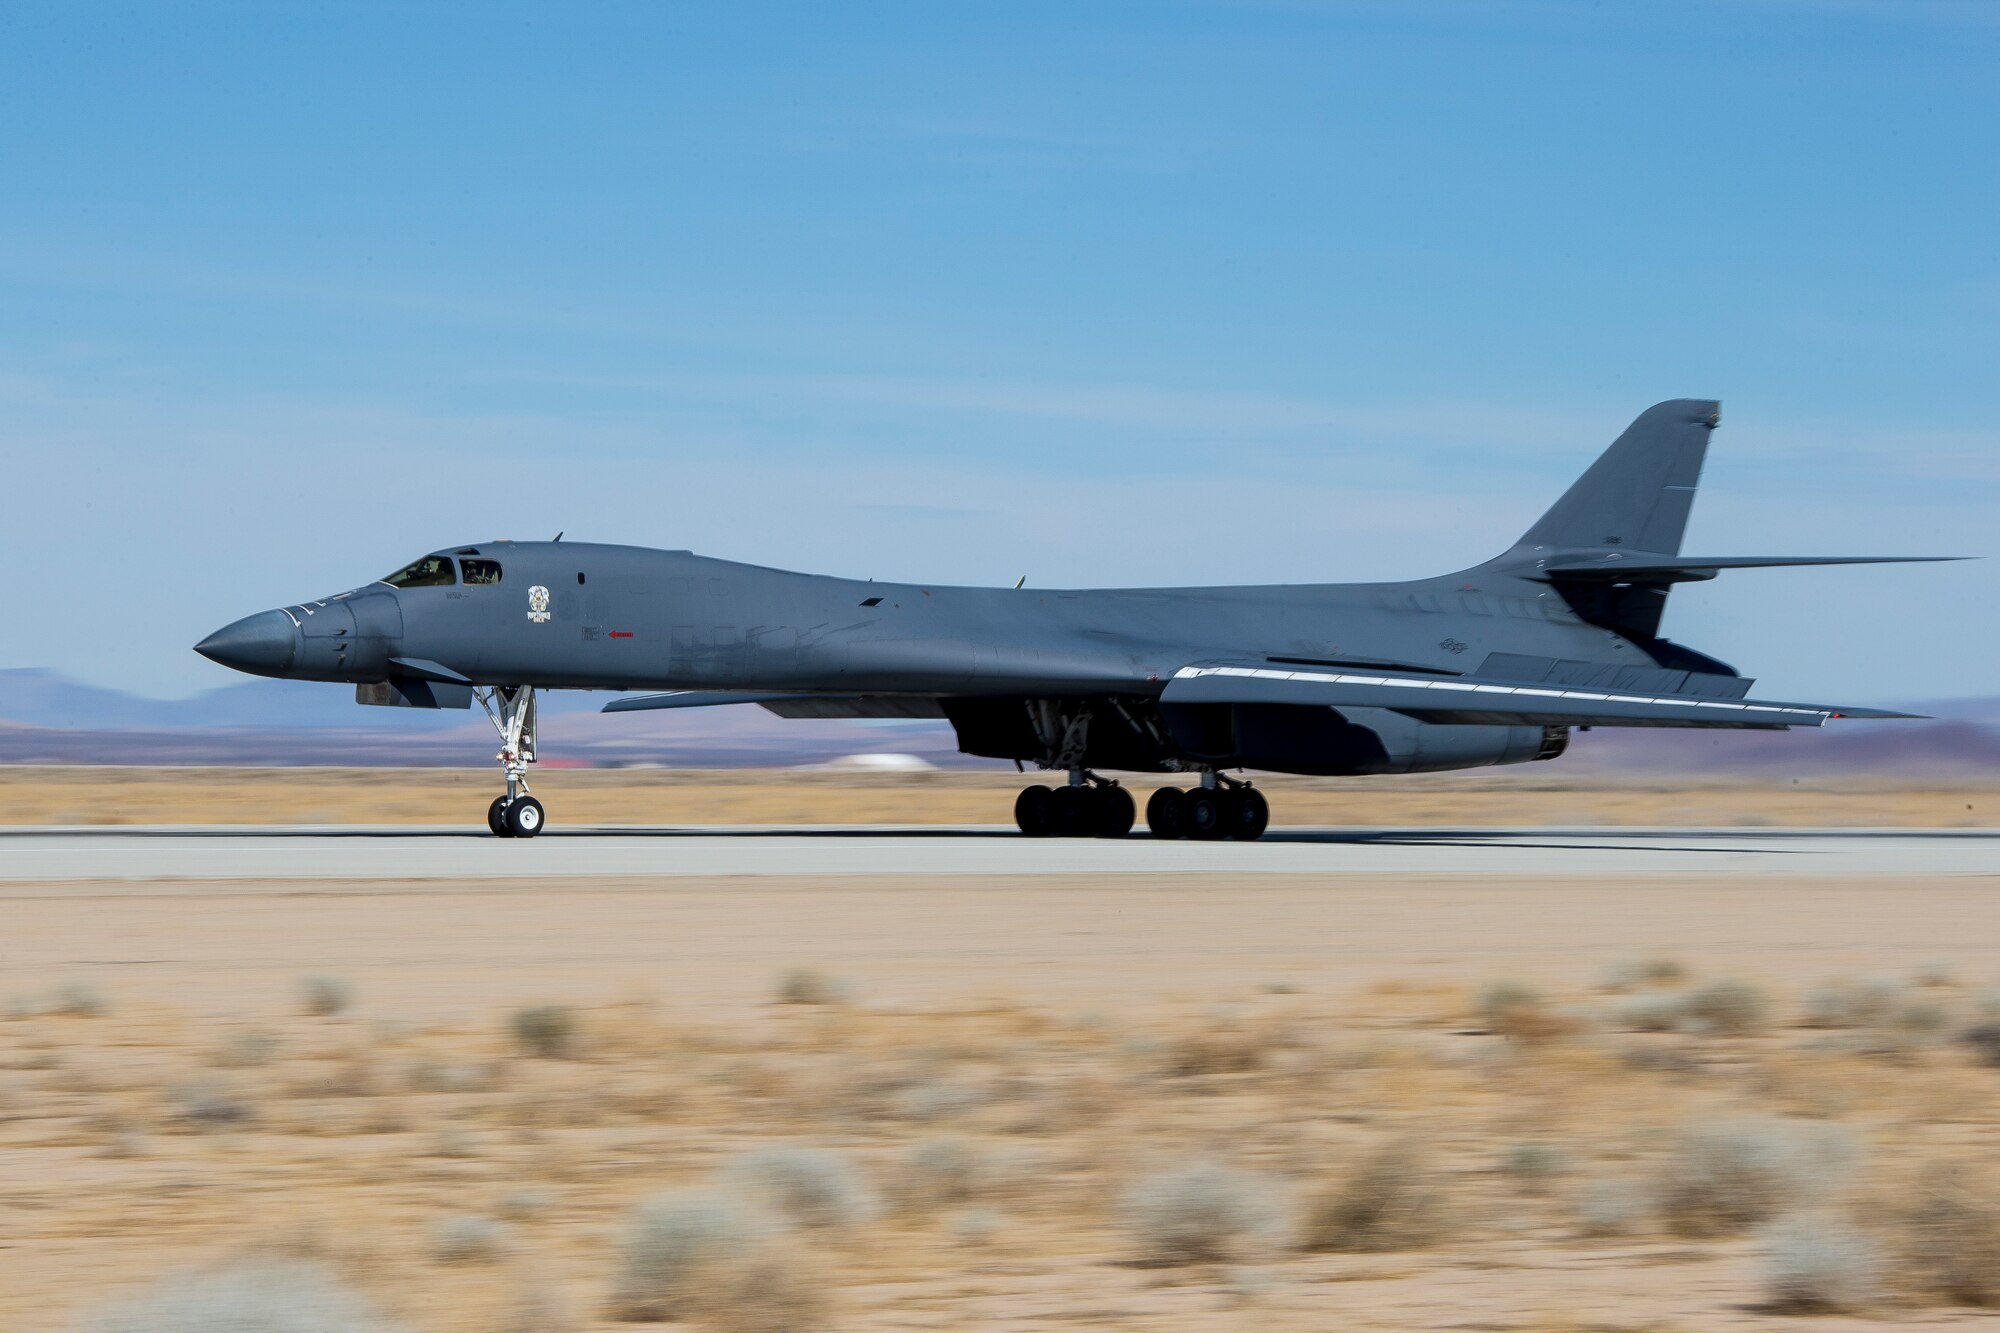 A recently retired B-1B Lancer, tail number 86-0099, lands at Edwards Air Force Base, California, Feb. 23. The aircraft will become the Edwards Aircraft Ground Integration Lab, or EAGIL, a non-flyable aircraft that will be used as an integration lab for future upgrades. (Air Force photo by May Straight)